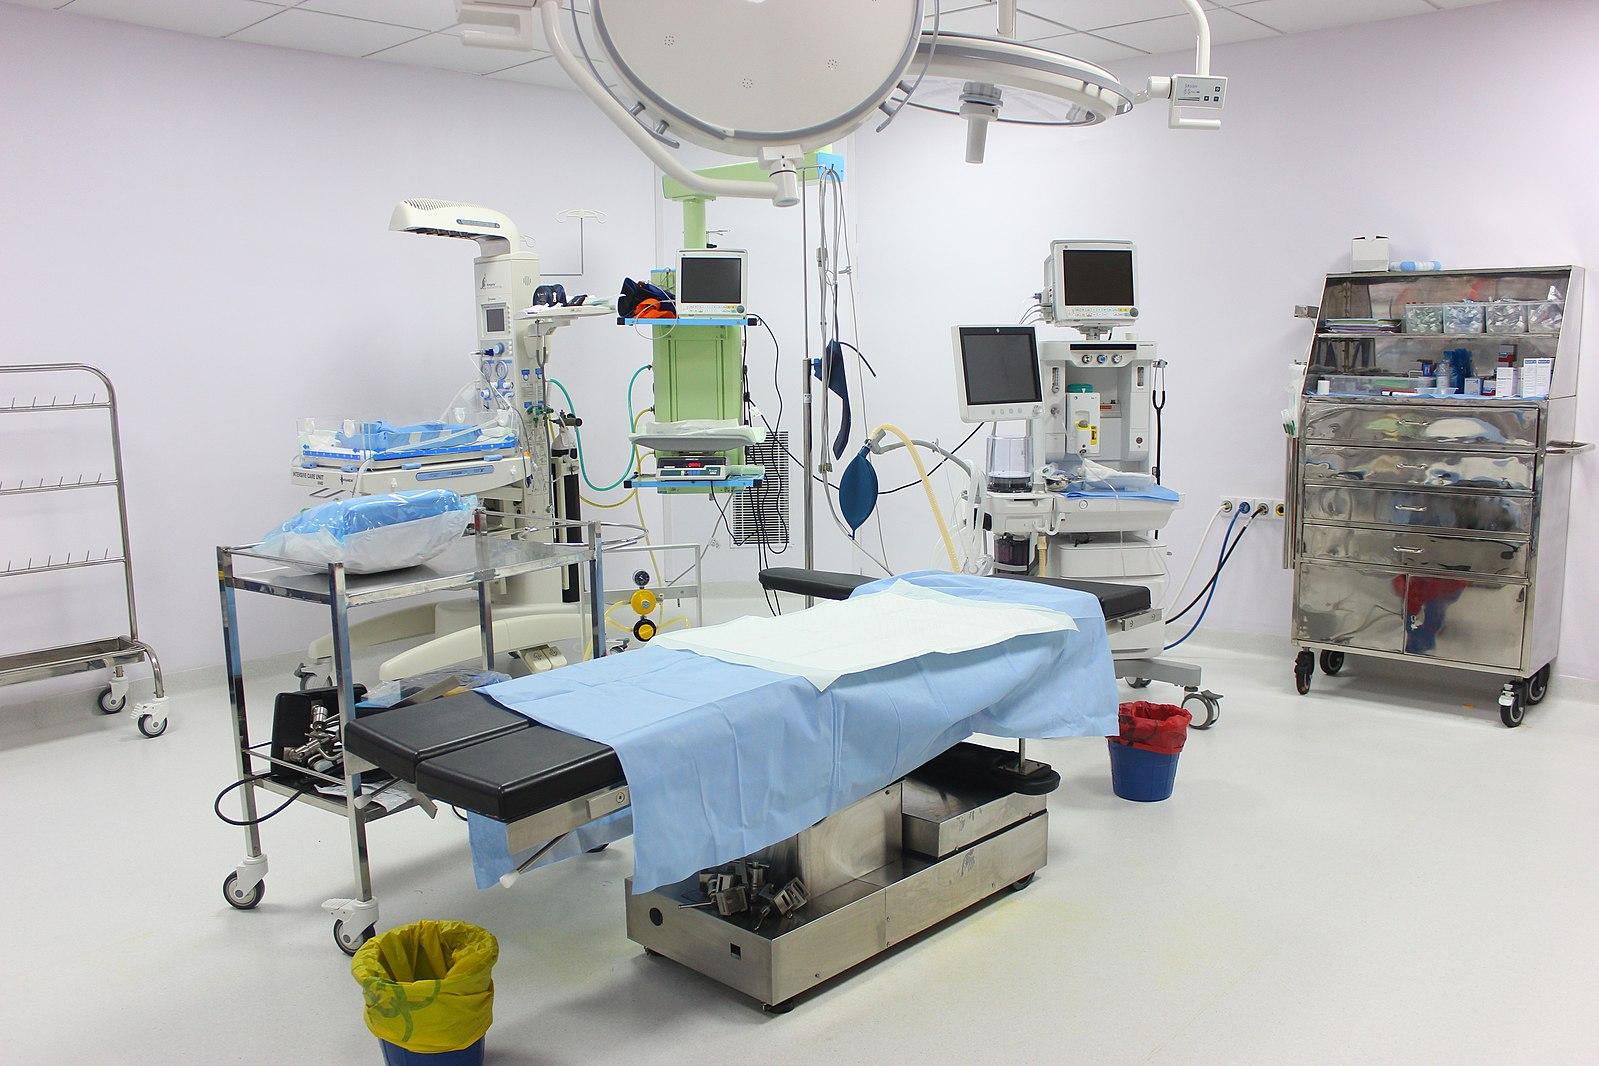 photo of an IVF clinic featuring medical equipment and an examination table